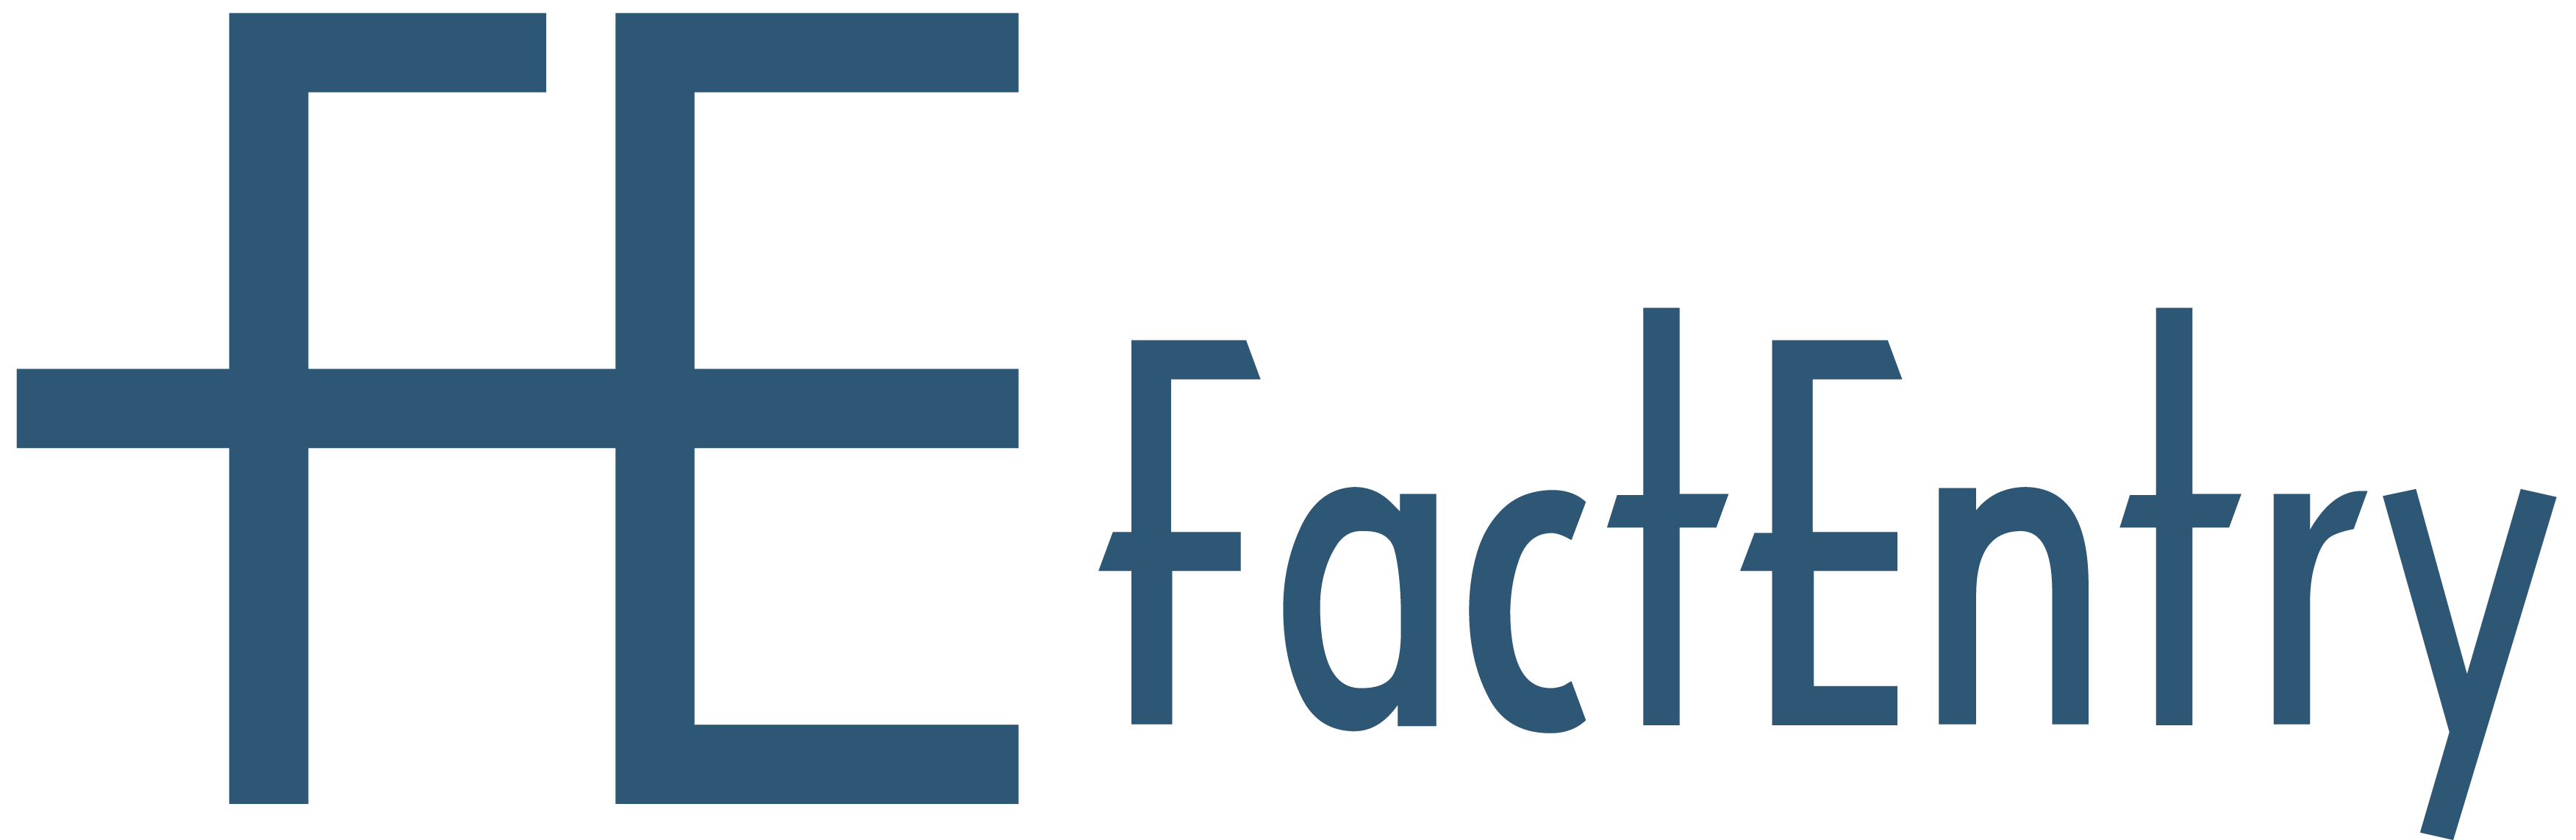 FactEntry_PNG_Logo